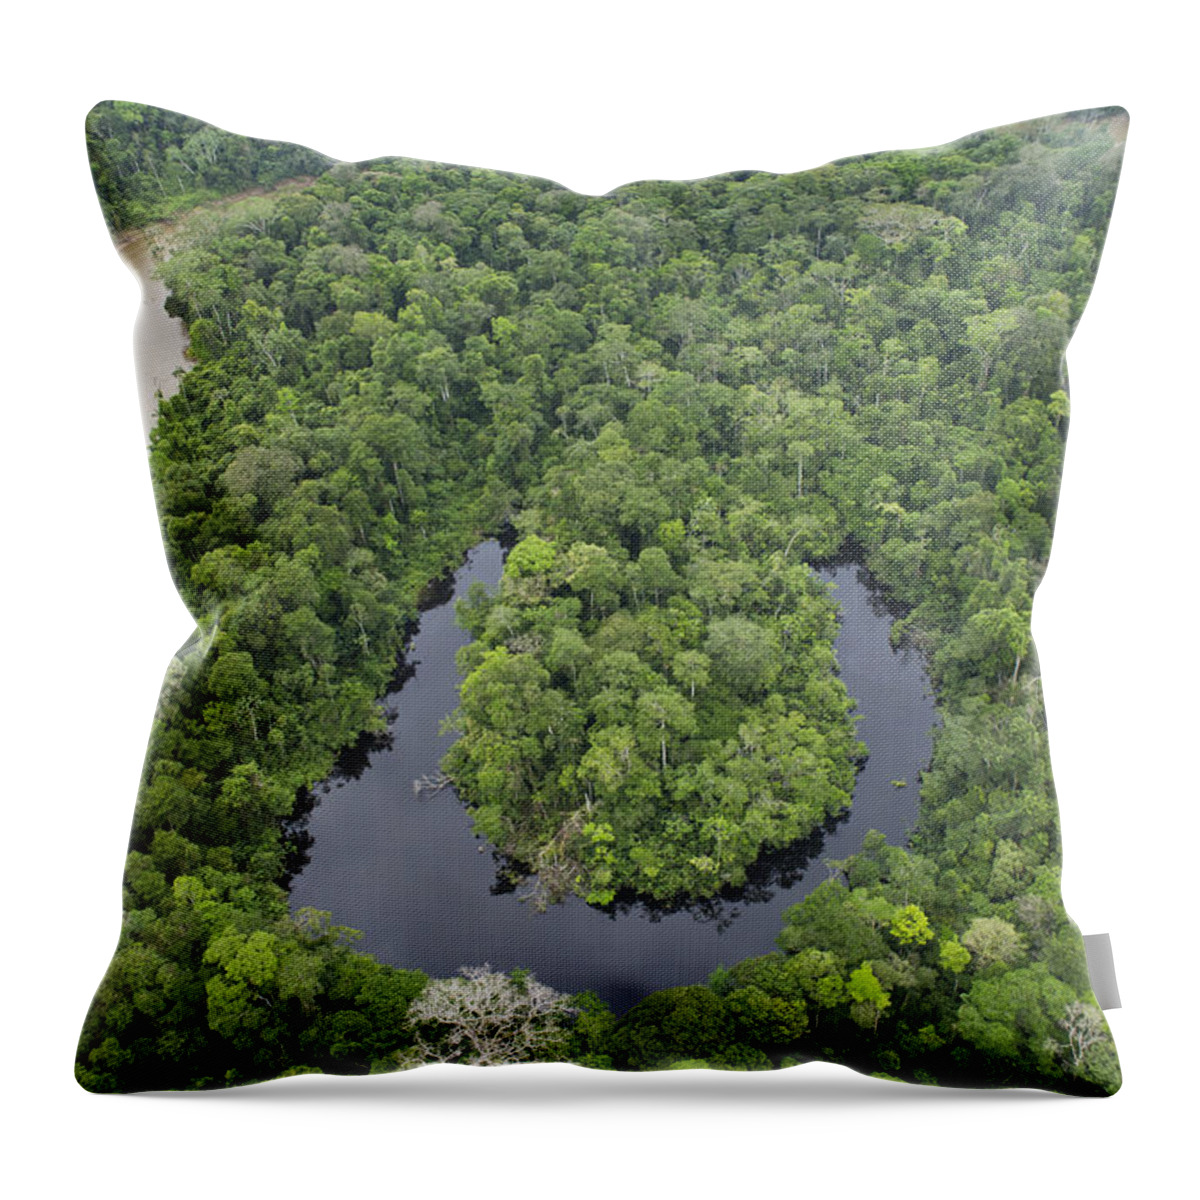 Feb0514 Throw Pillow featuring the photograph Tiputini River And Oxbow Lake Yasuni by Pete Oxford